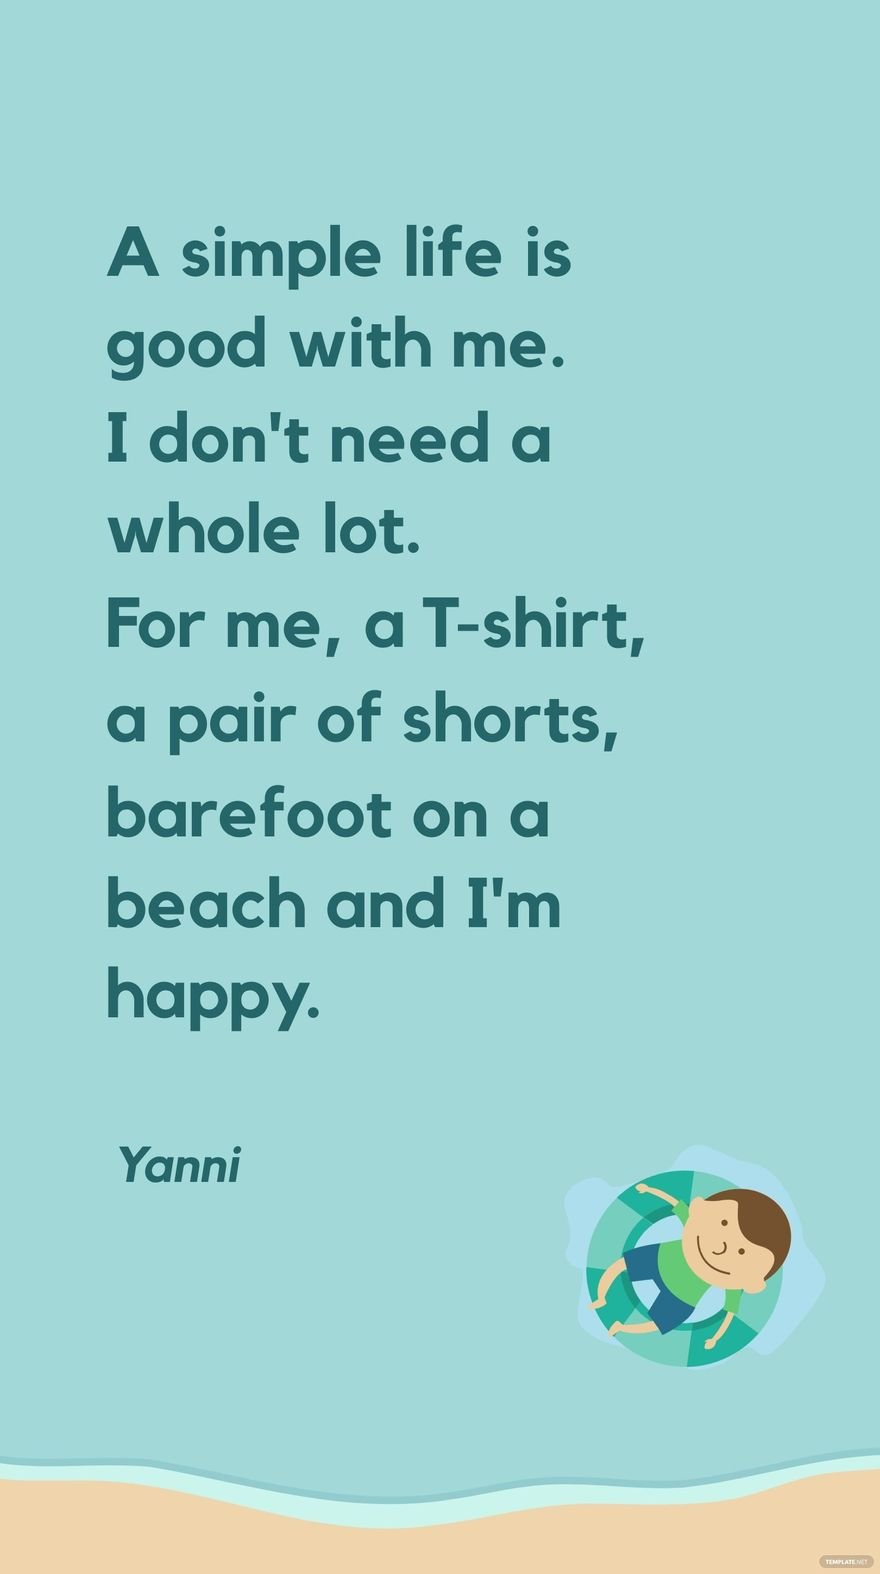 Free Yanni - A simple life is good with me. I don't need a whole lot. For me, a T-shirt, a pair of shorts, barefoot on a beach and I'm happy. in JPG